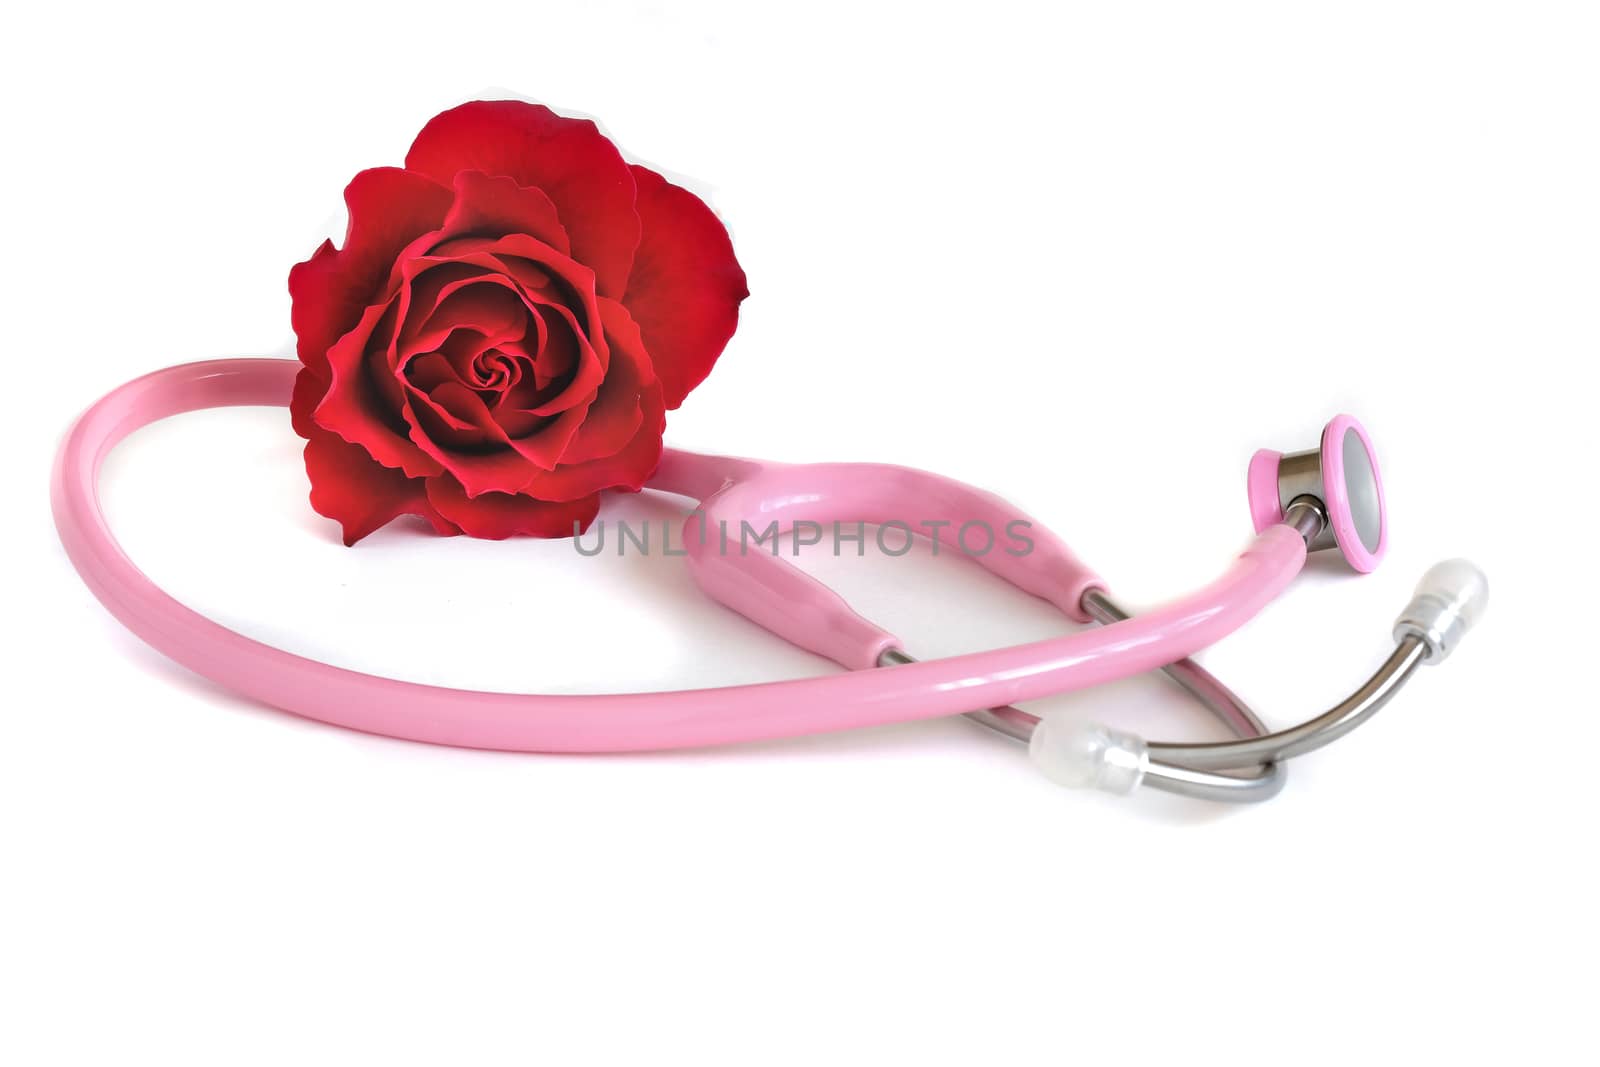 a pink stethoscope and a red rose by Nawoot